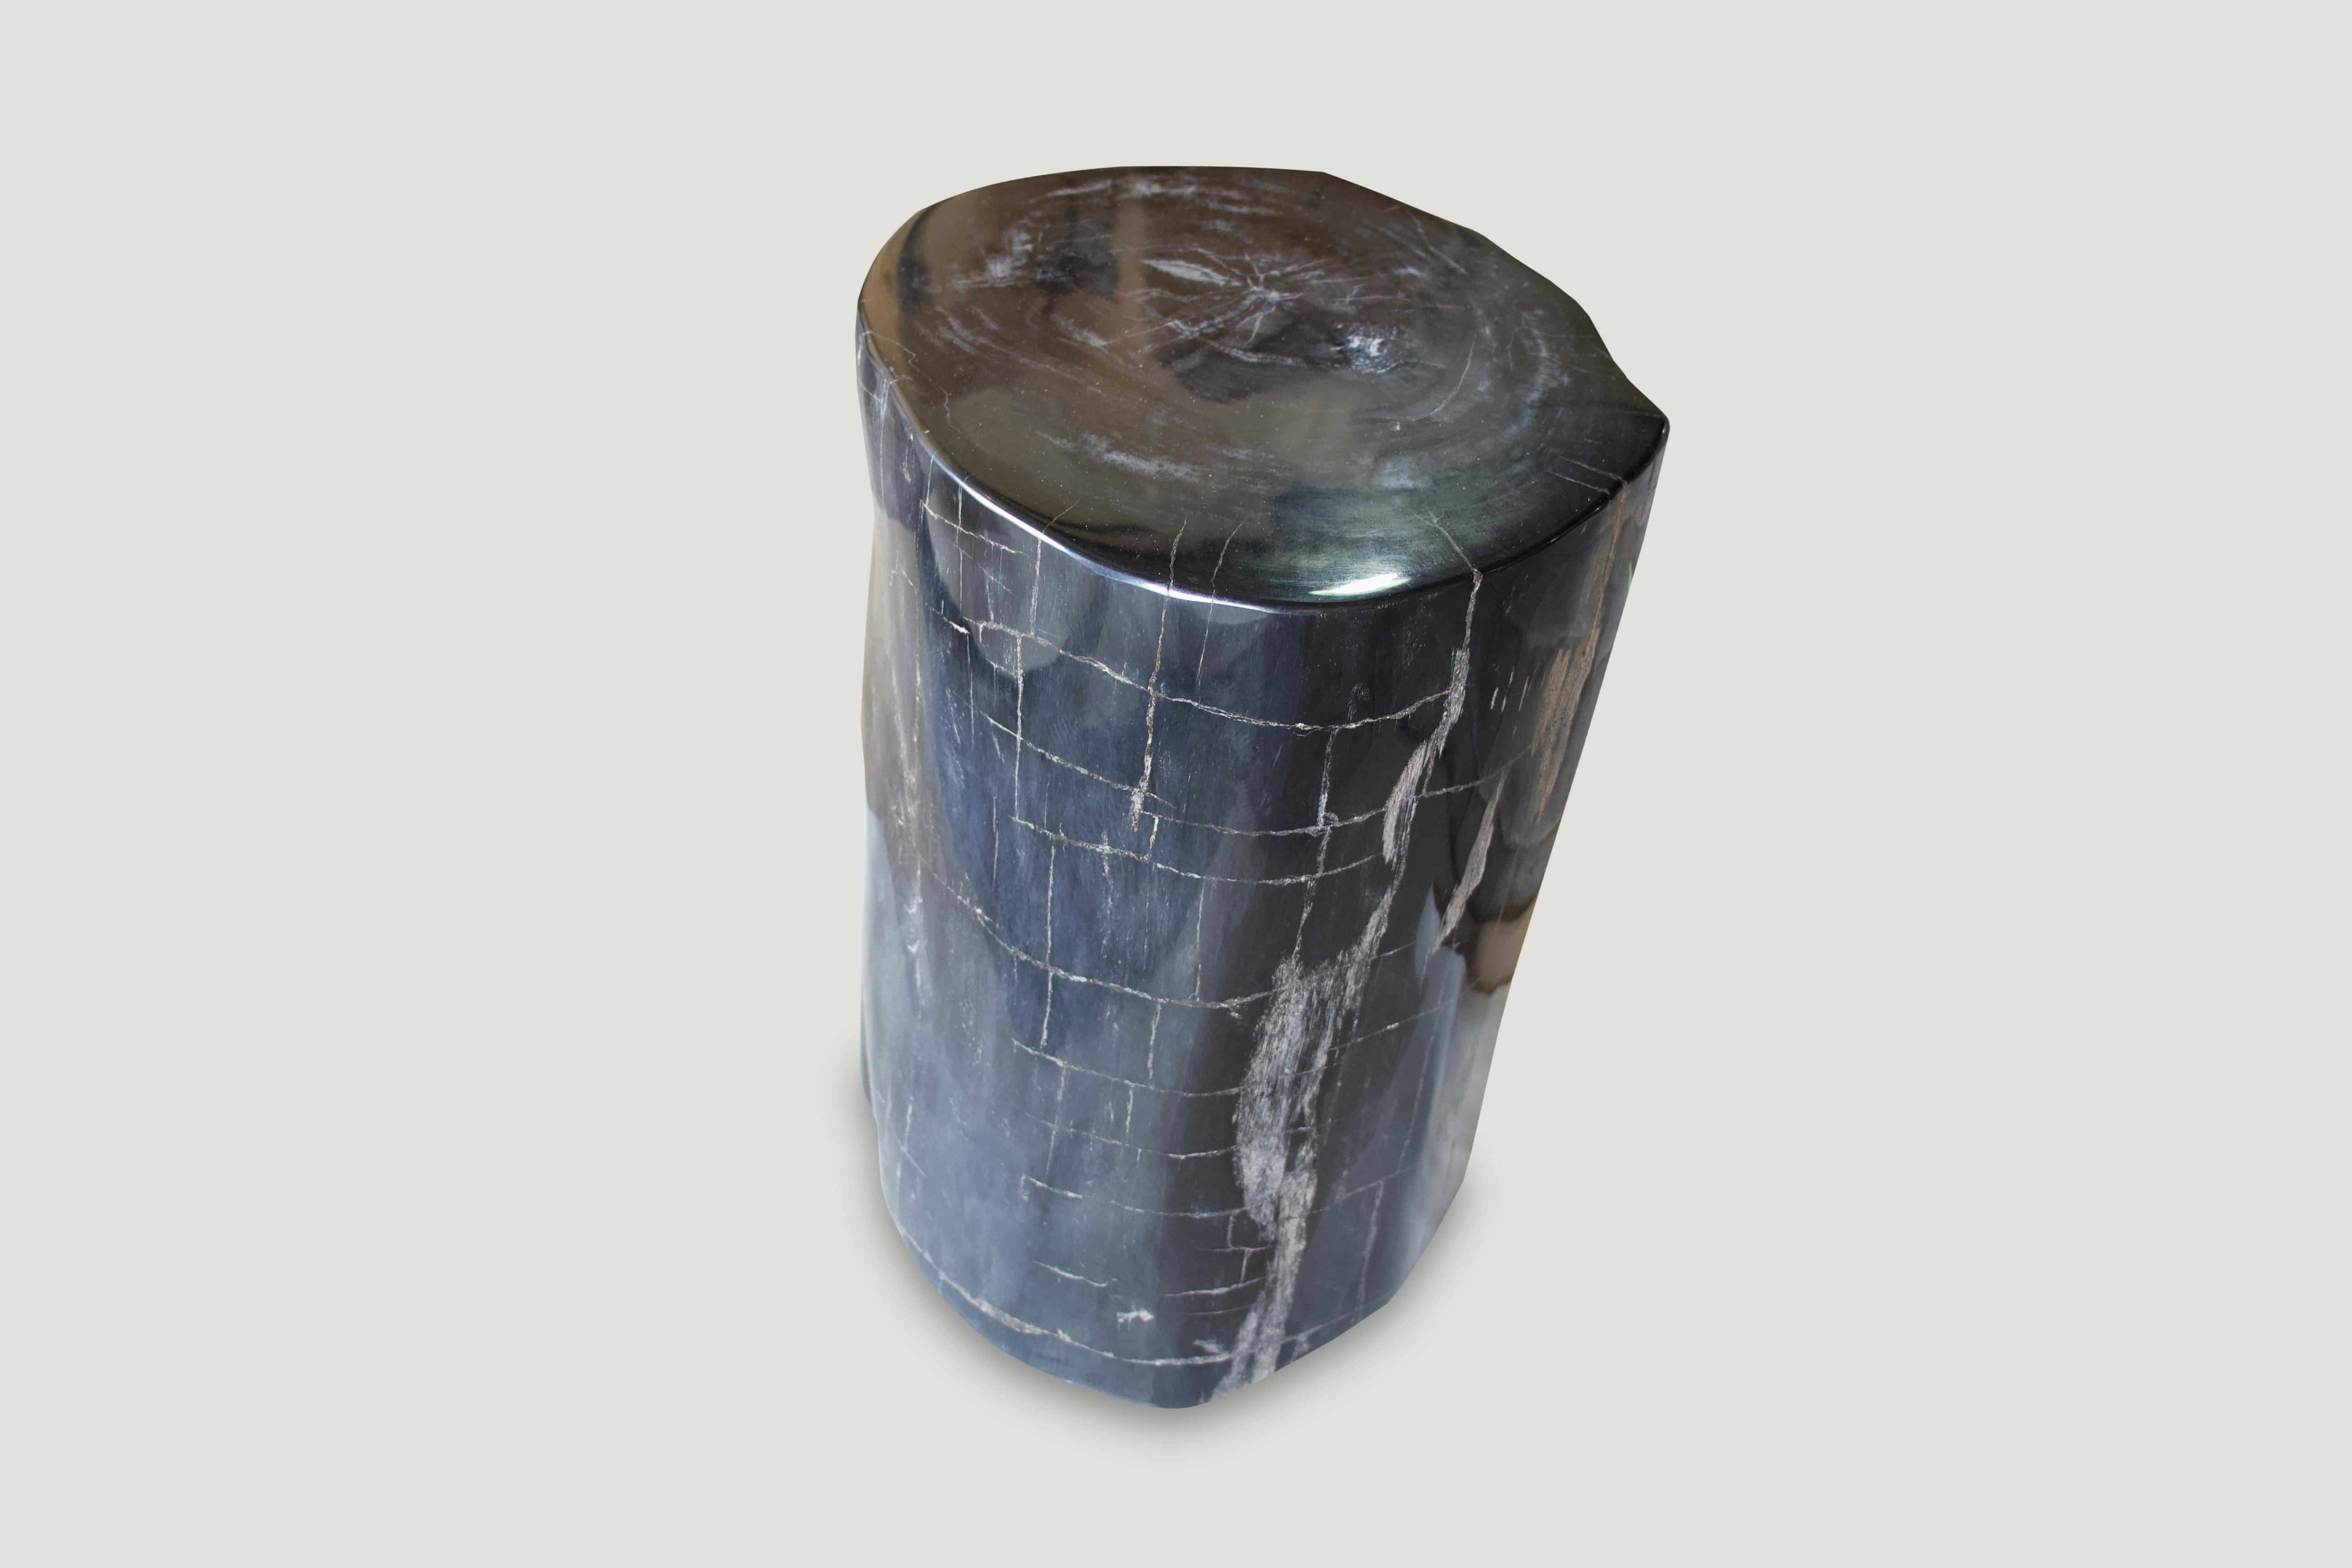 Super smooth black with natural occurring checkered grey pattern on this high quality petrified wood side table.

As with a diamond, we polish the highest quality fossilized petrified wood, using our latest ground breaking technology, to reveal